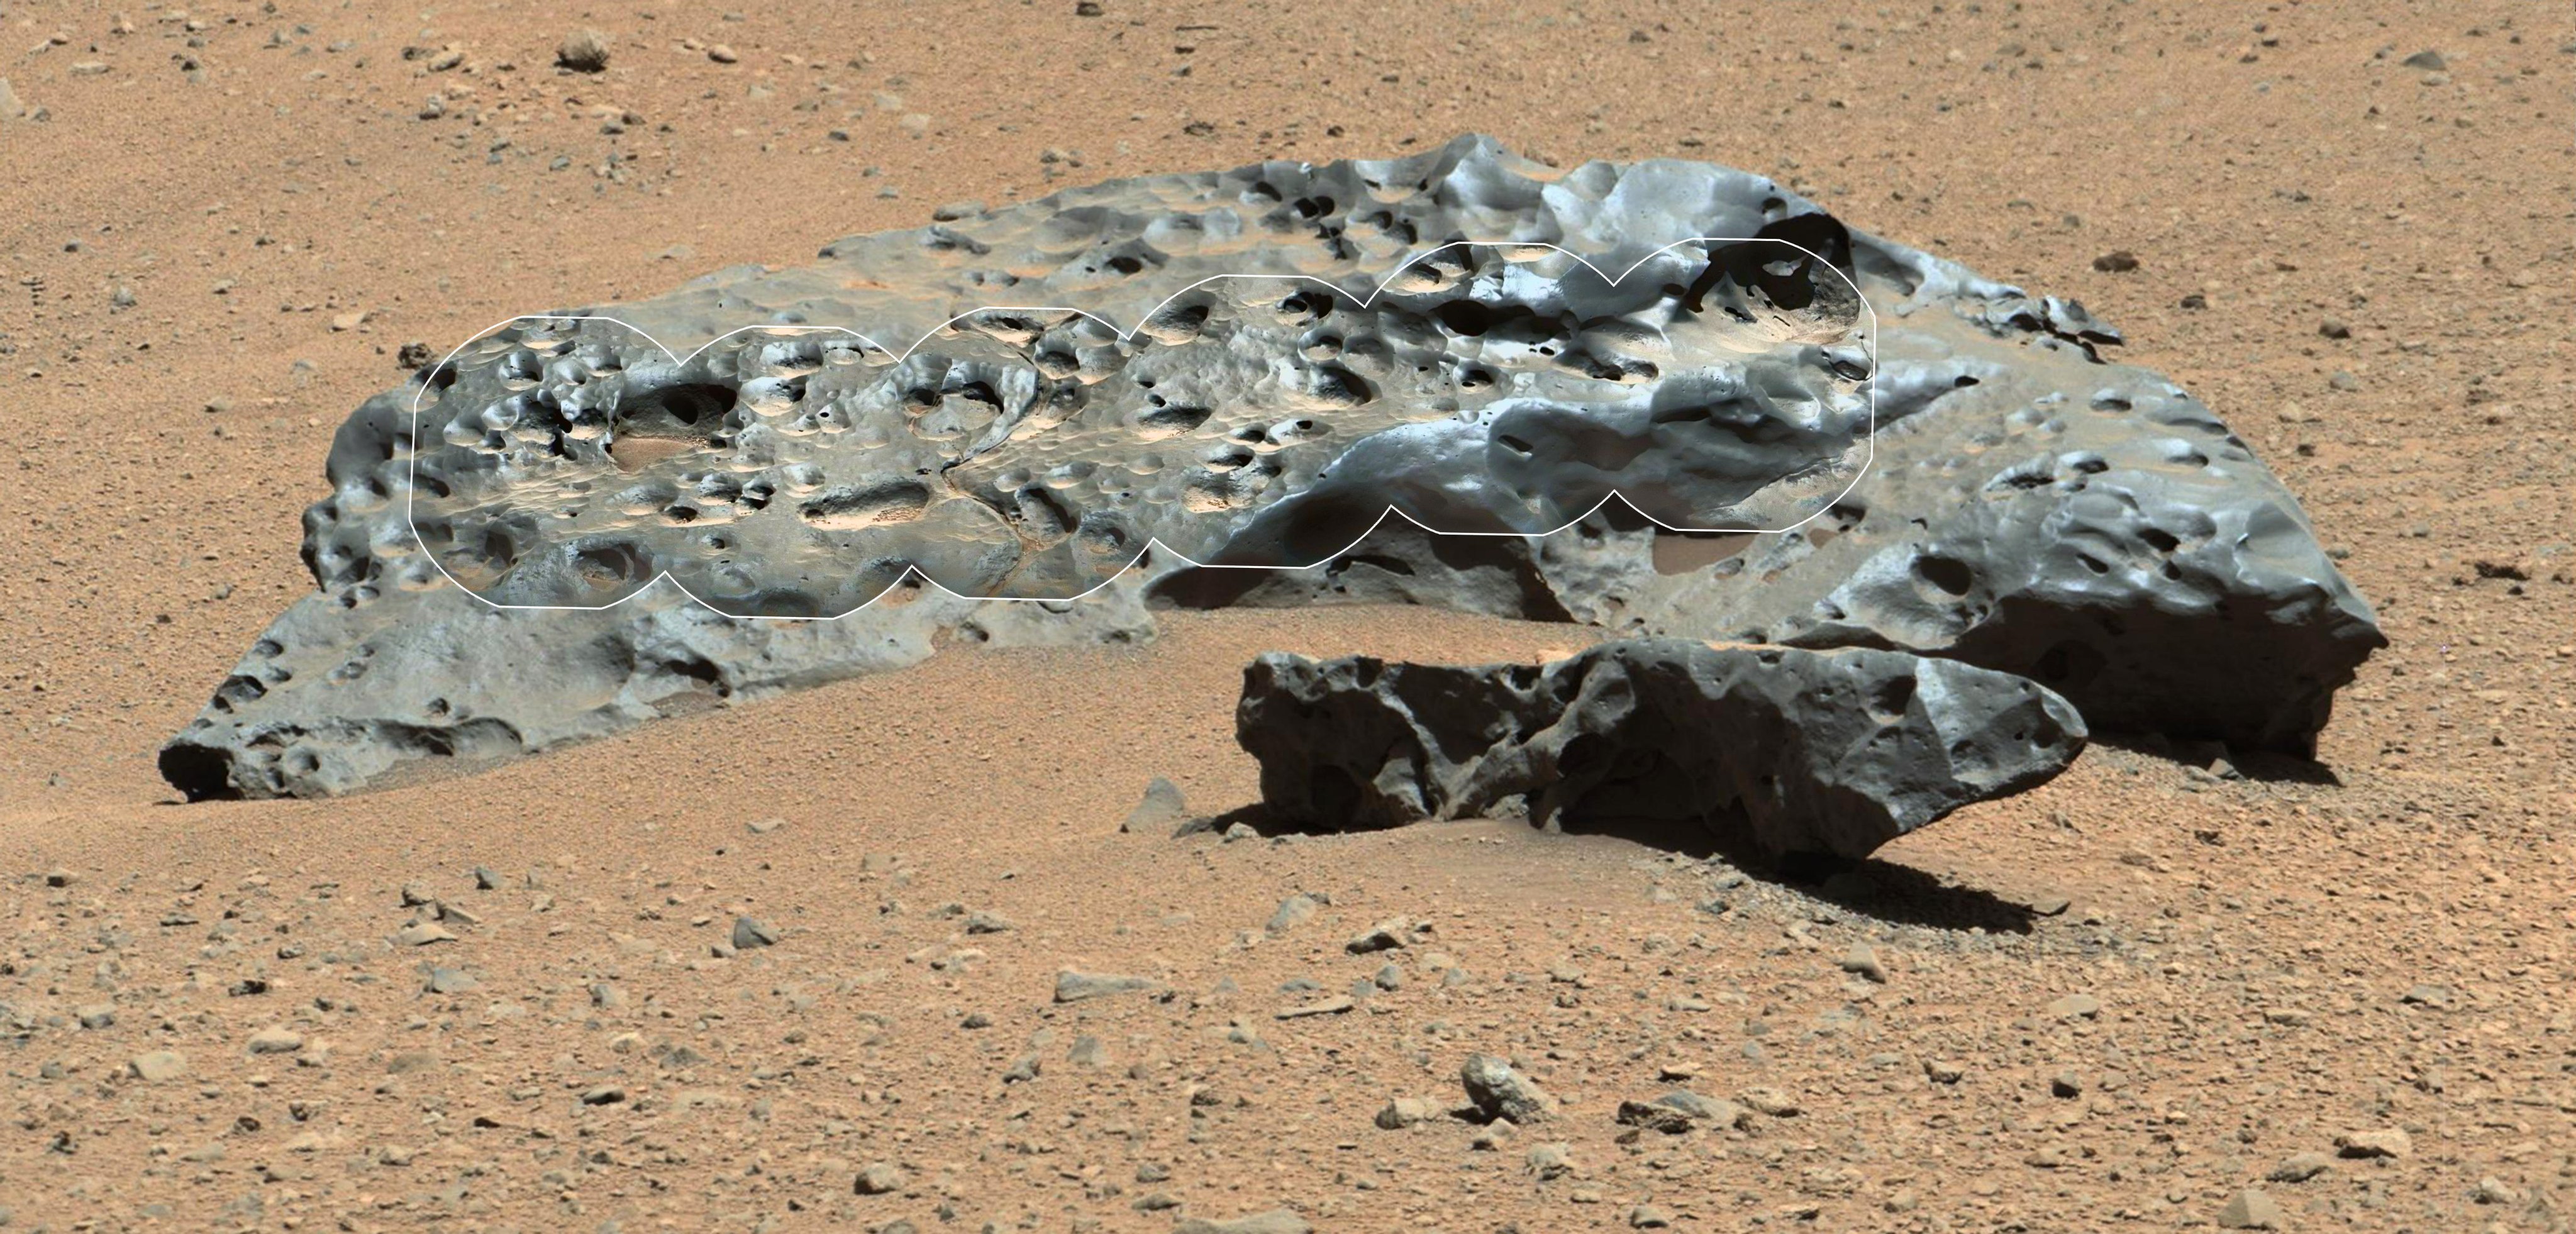 Curiosity rover finds alien Cacao on Mars